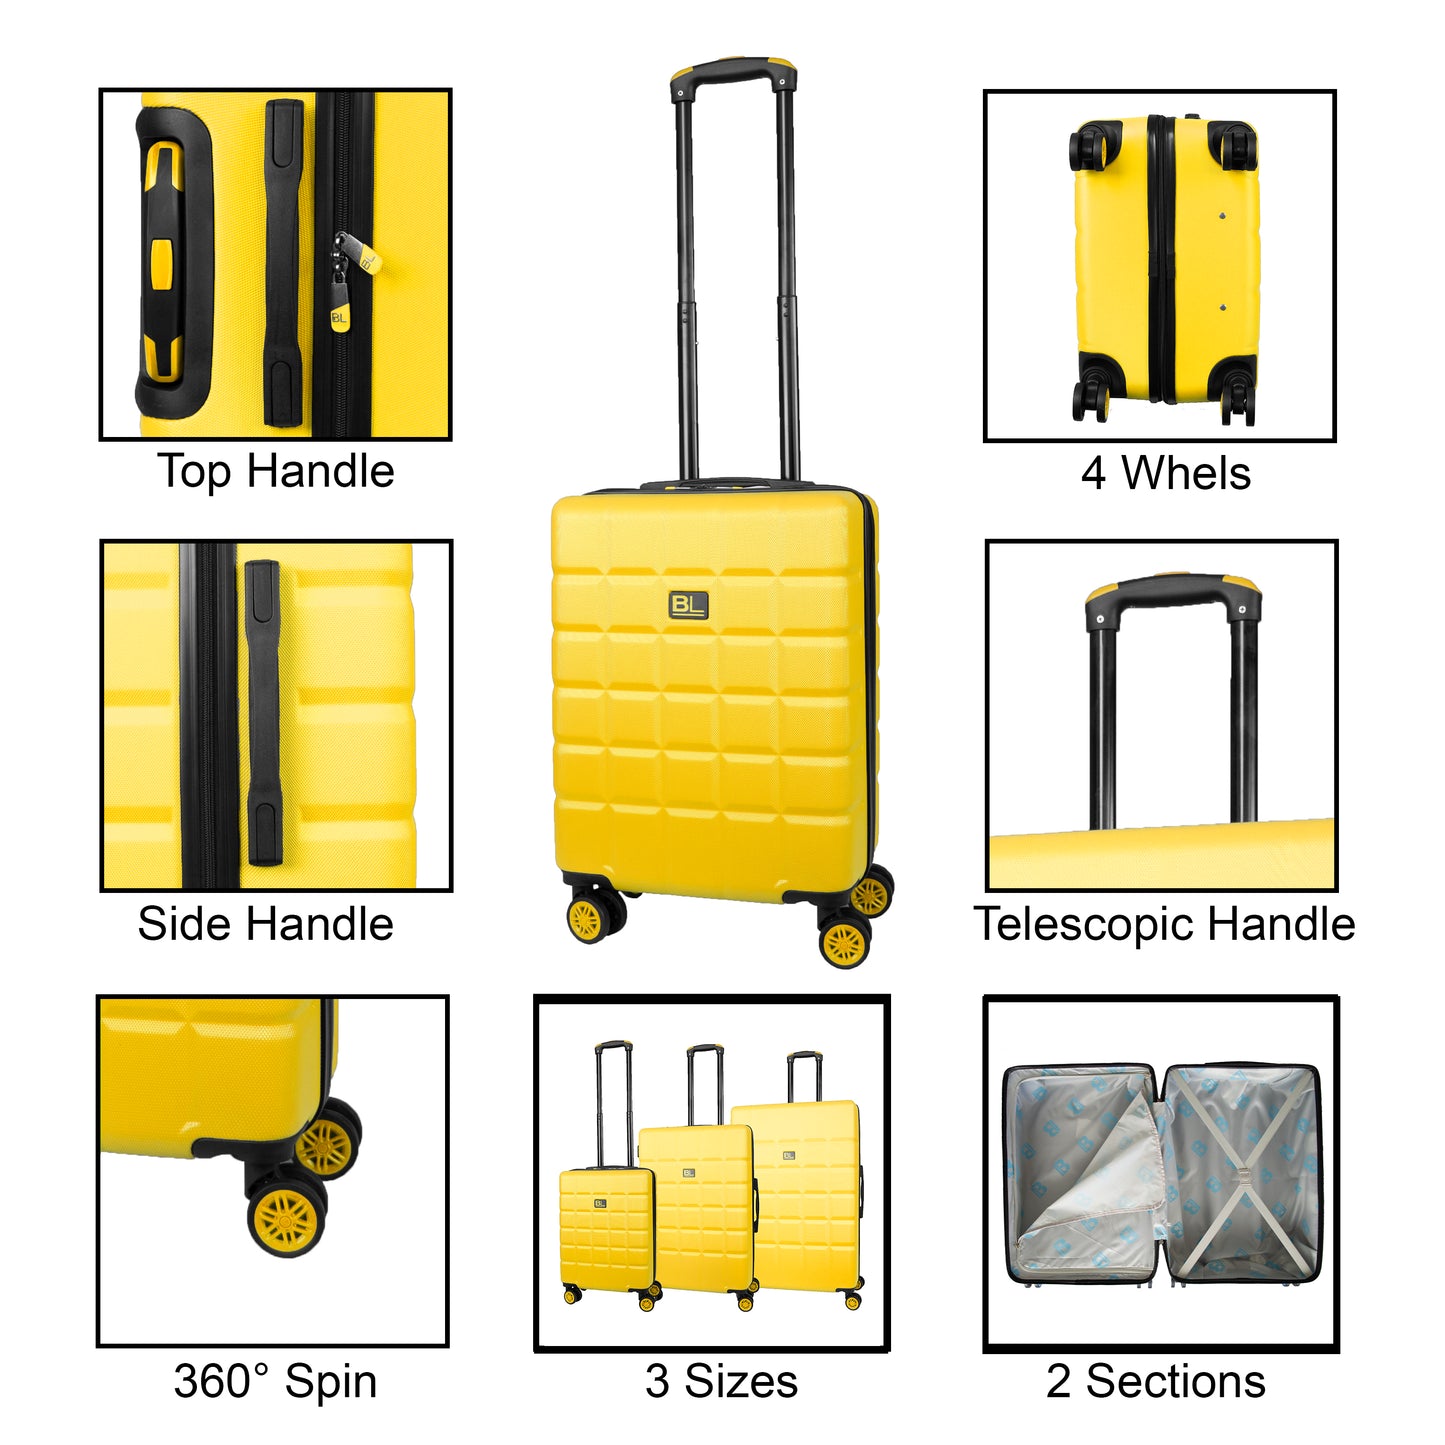 Hard Shell Luggage with 4 Spinner Wheels, Yellow